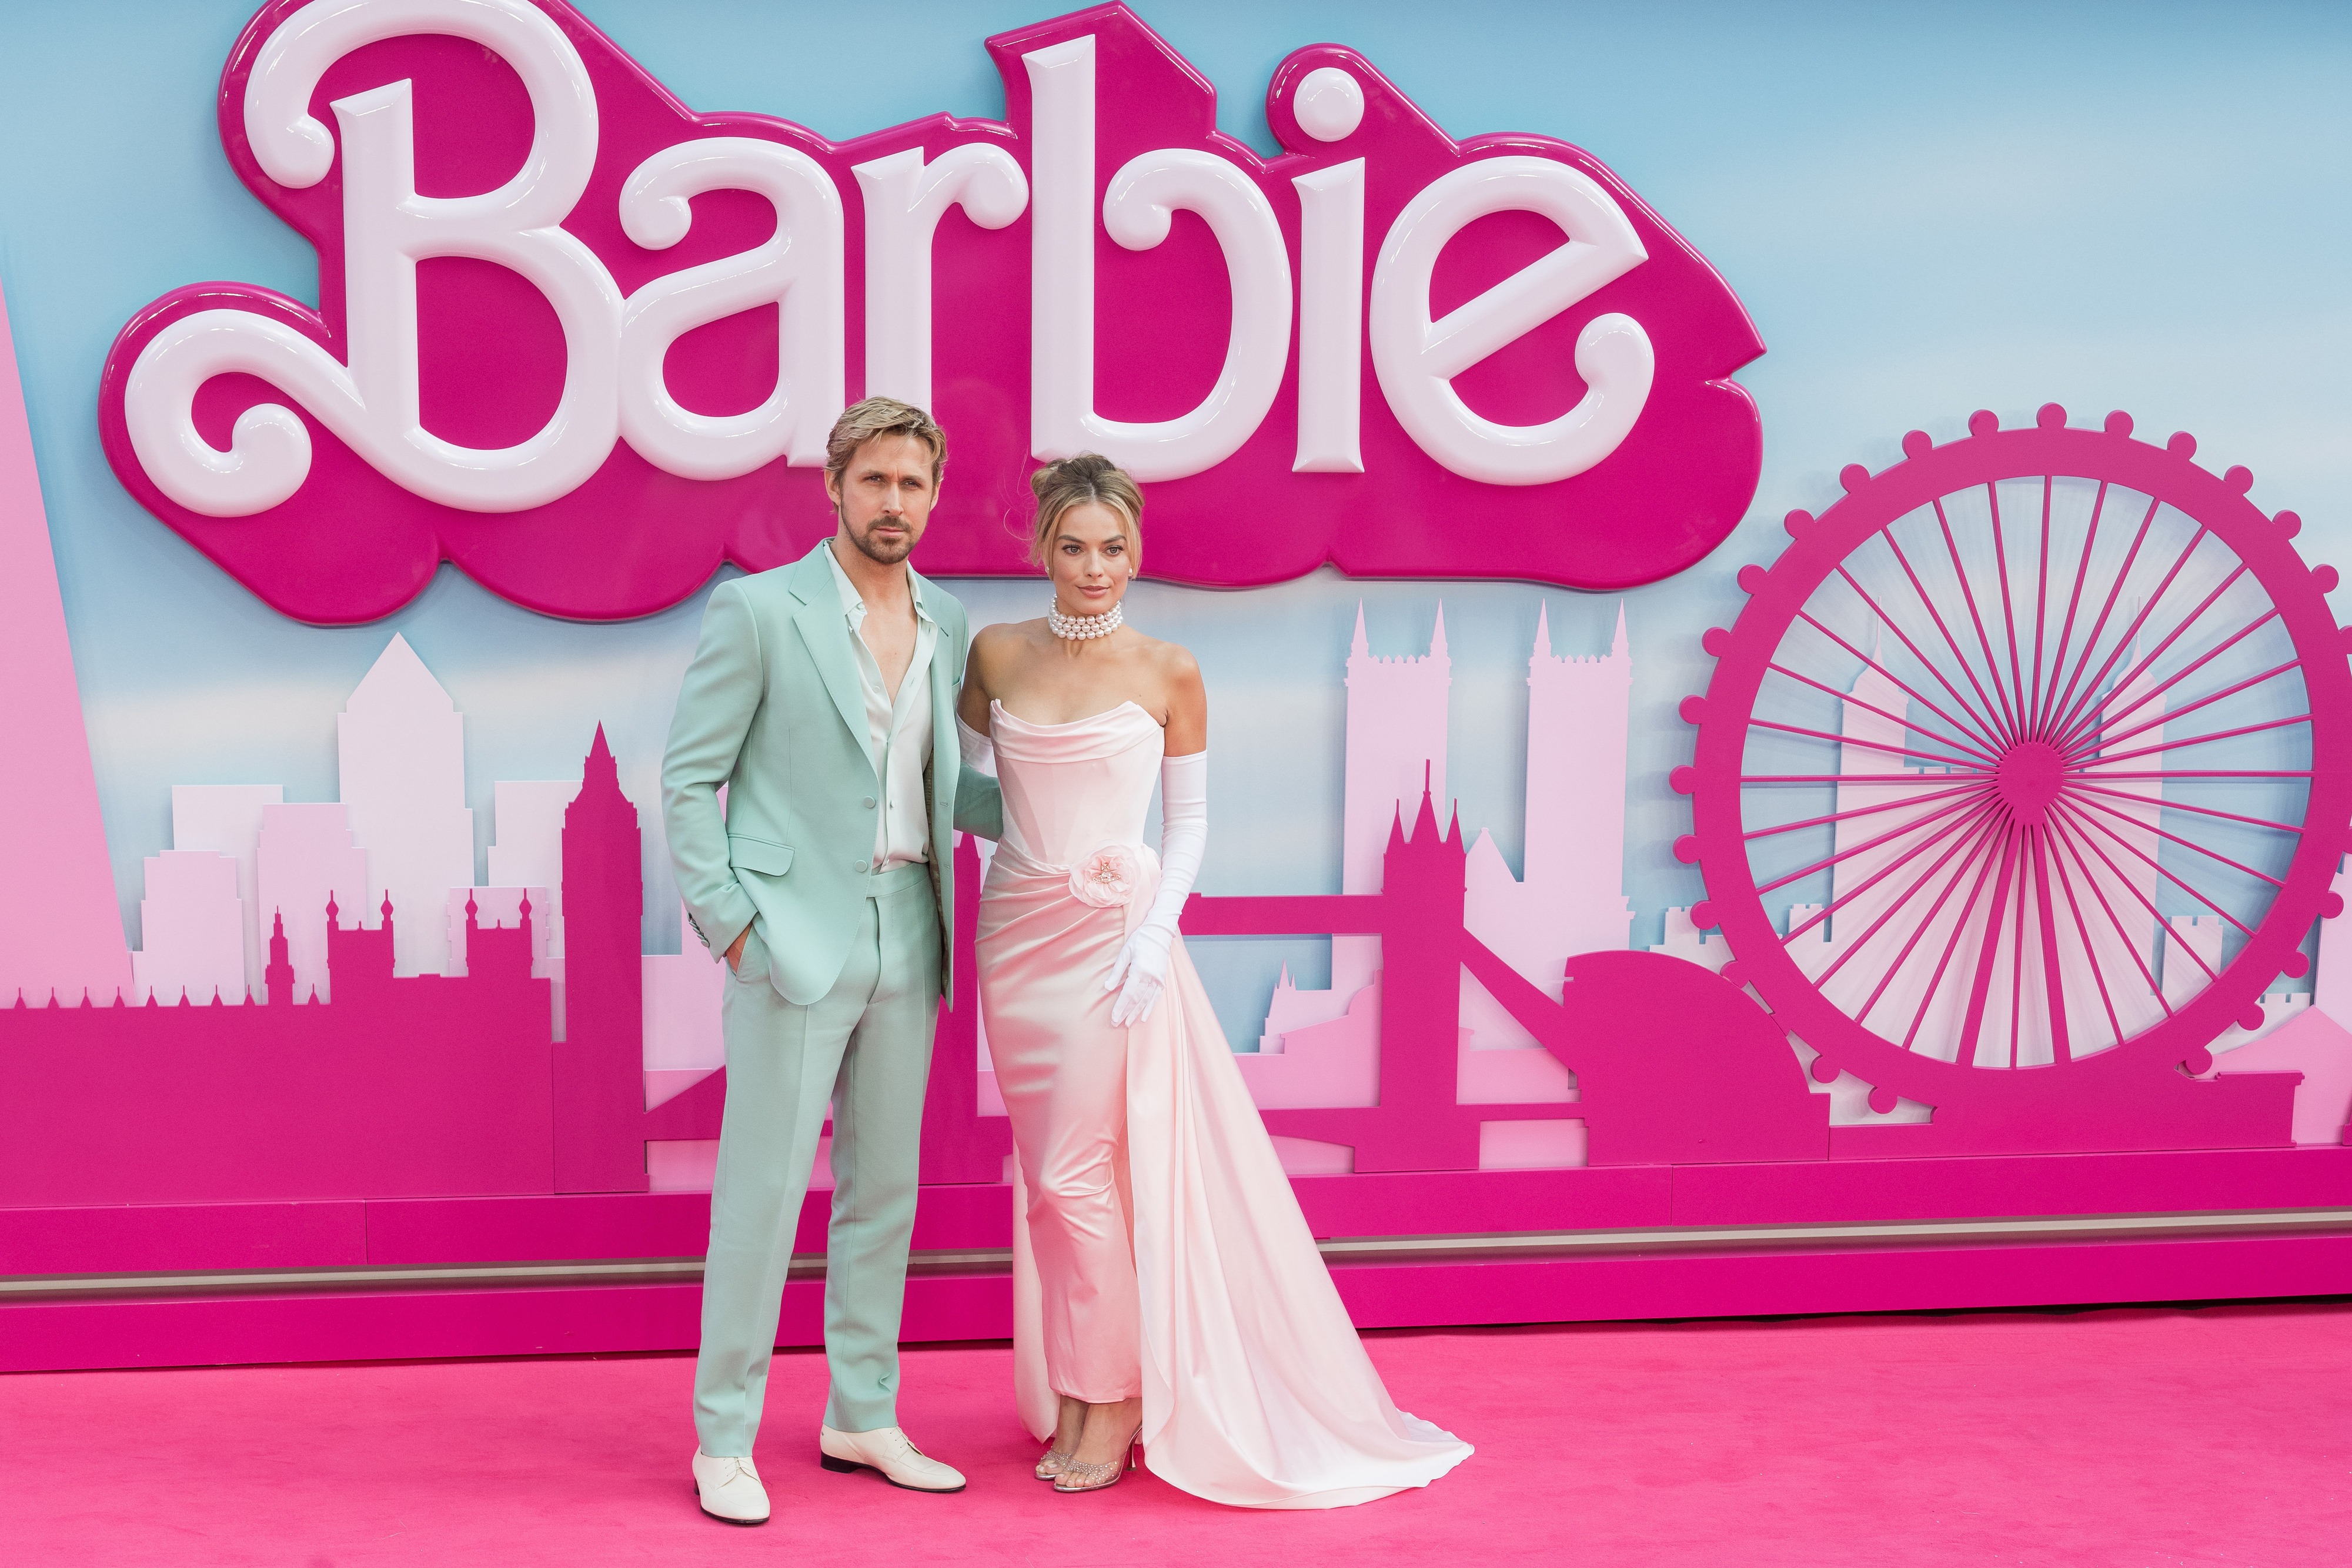 margot robbie and ryan gosling dressed up for the barbie premiere